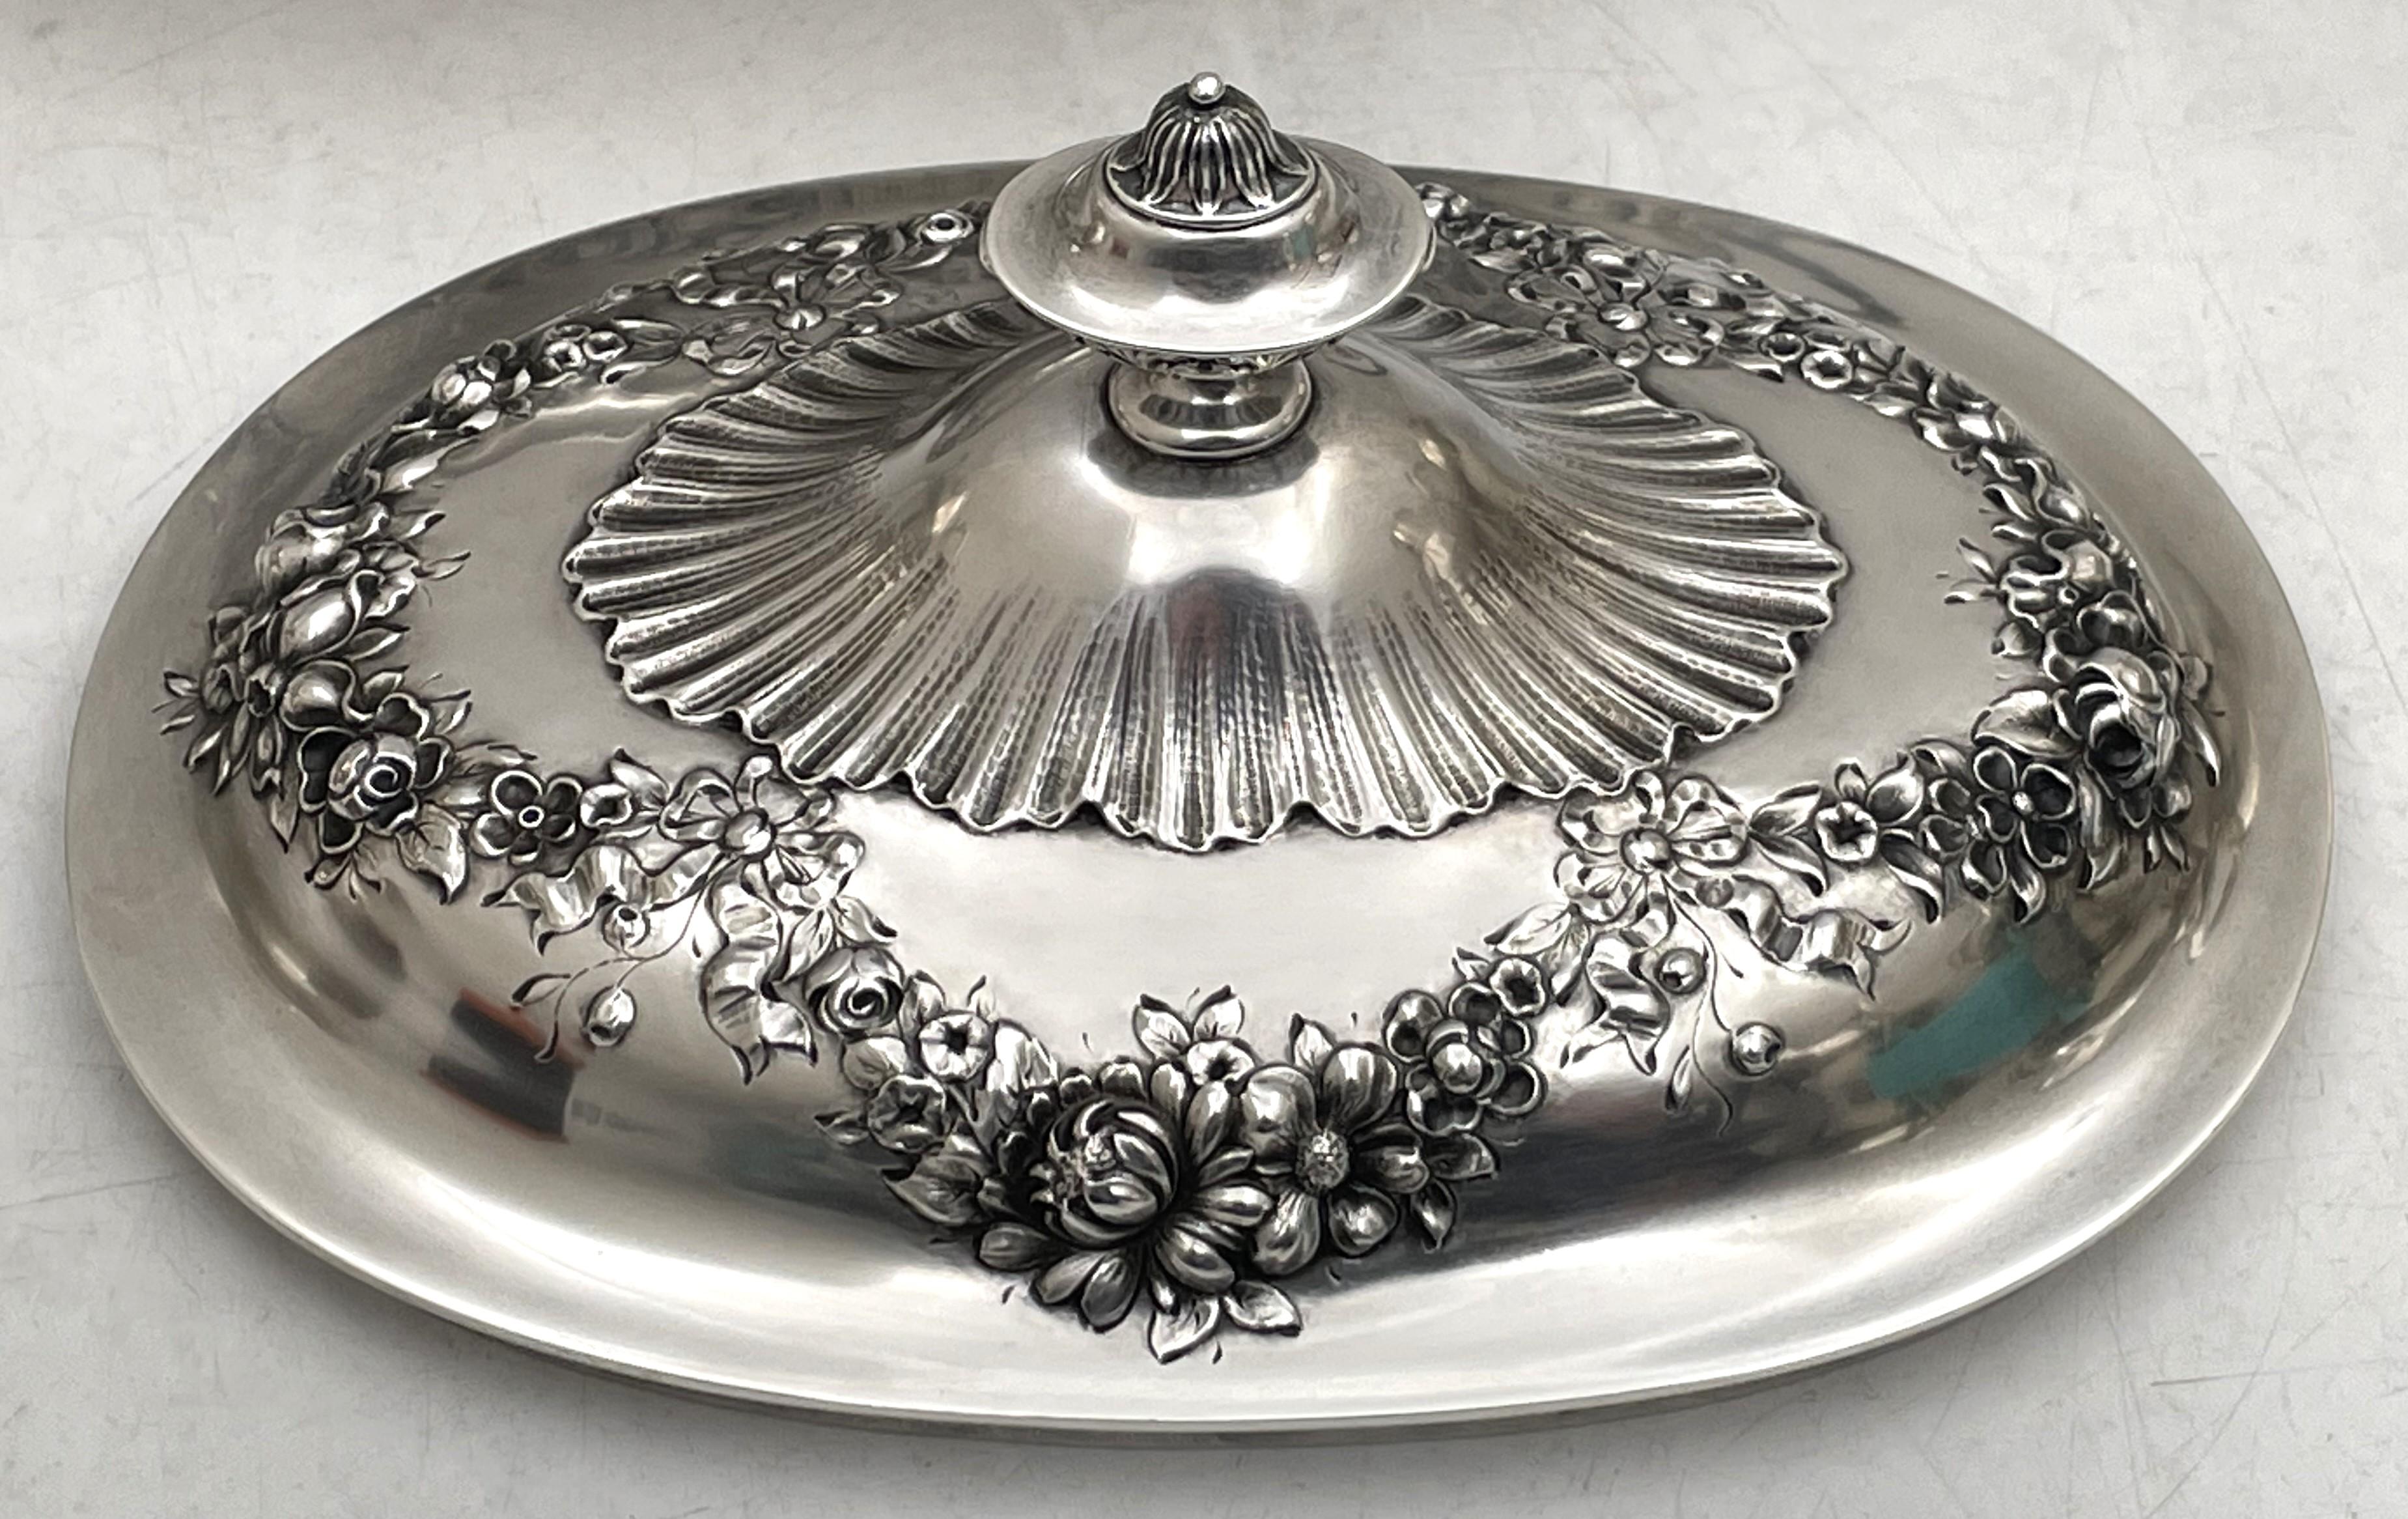 American Gorham Sterling Silver 1898 Two-Handled Tureen/ Covered Bowl Art Nouveau Style For Sale